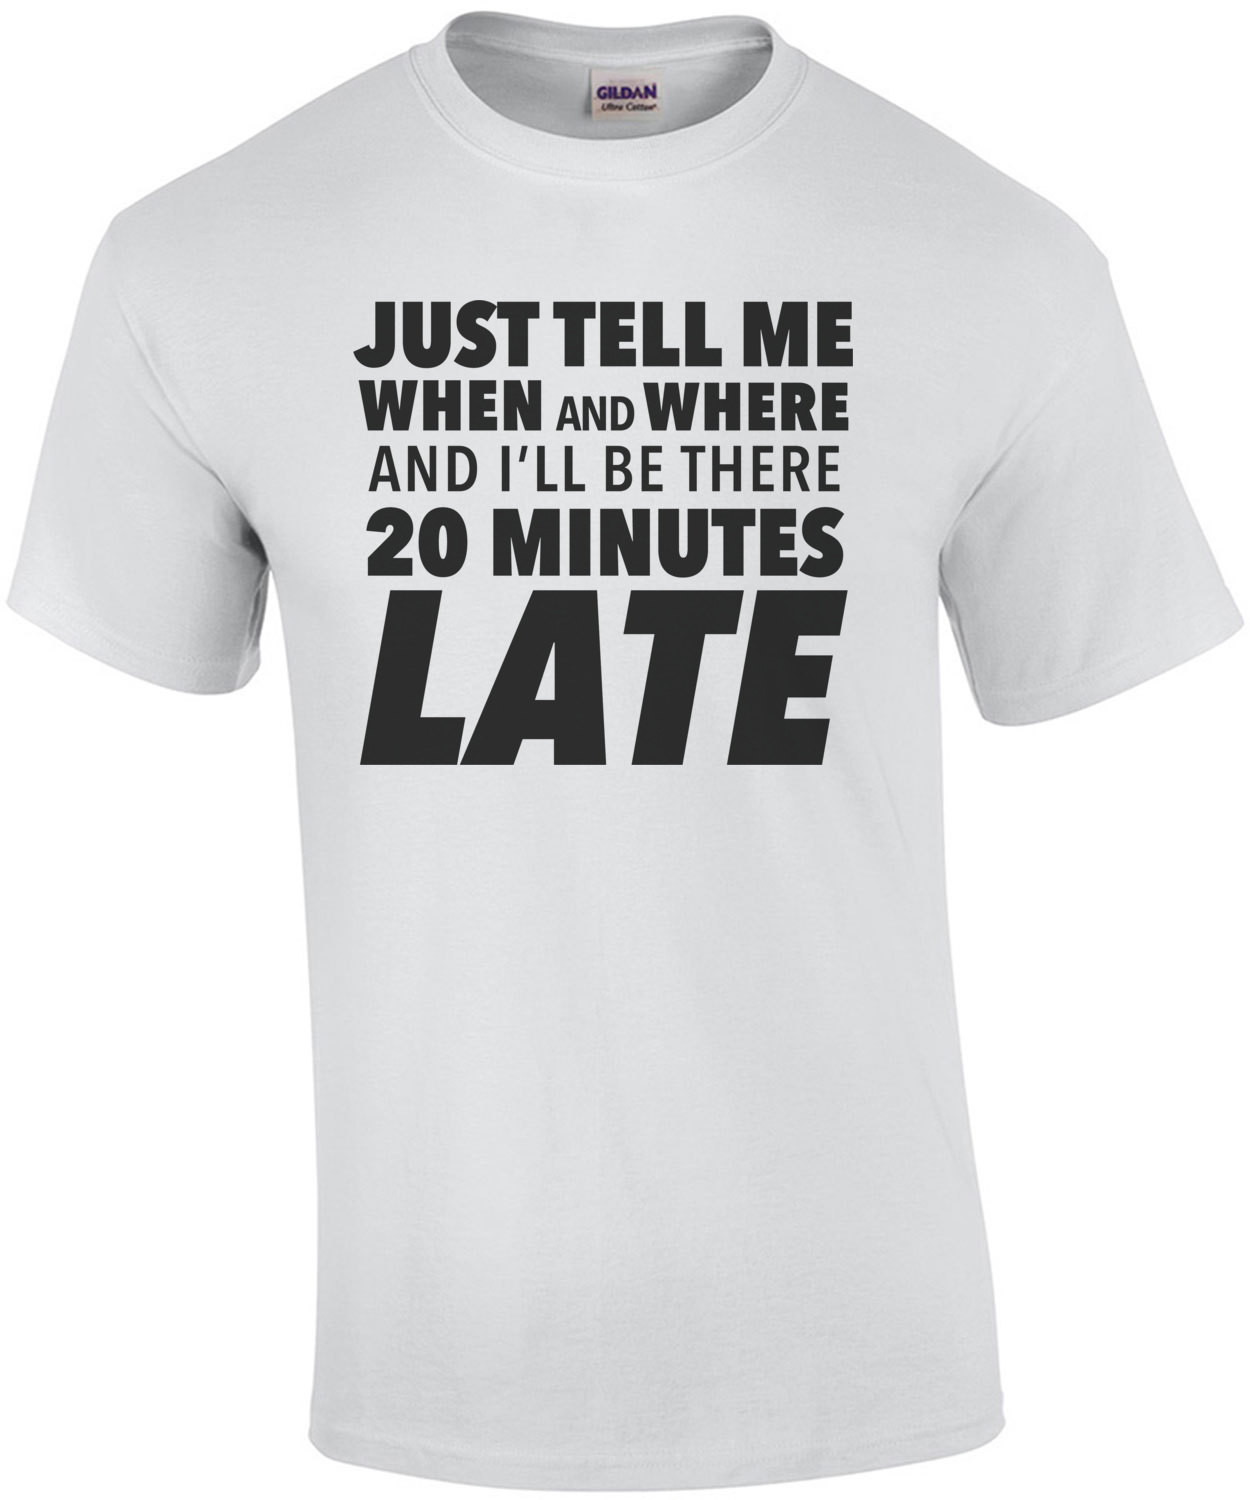 Just tell me when and where and I'll be there 20 minutes late - sarcastic t-shirt